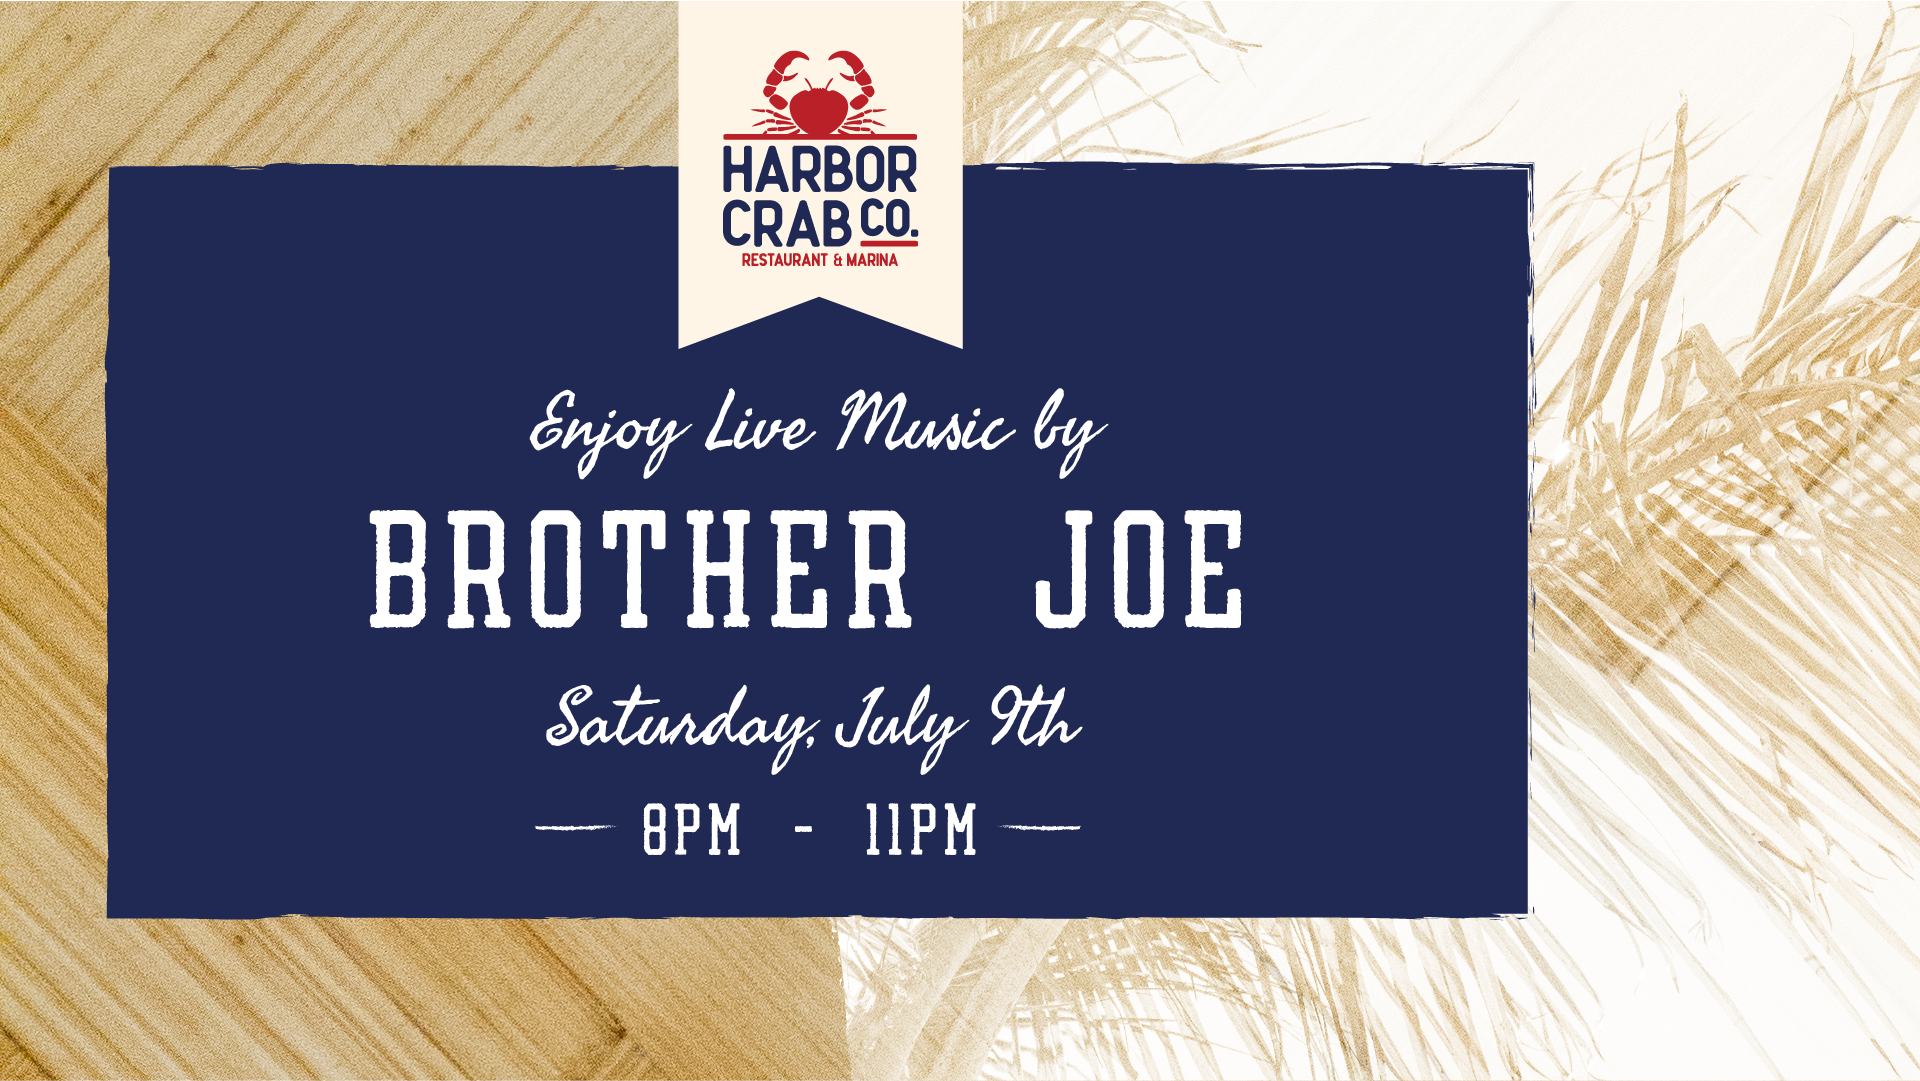 Flyer for Brother Joe at Harbor Crab on July 9th at 8pm